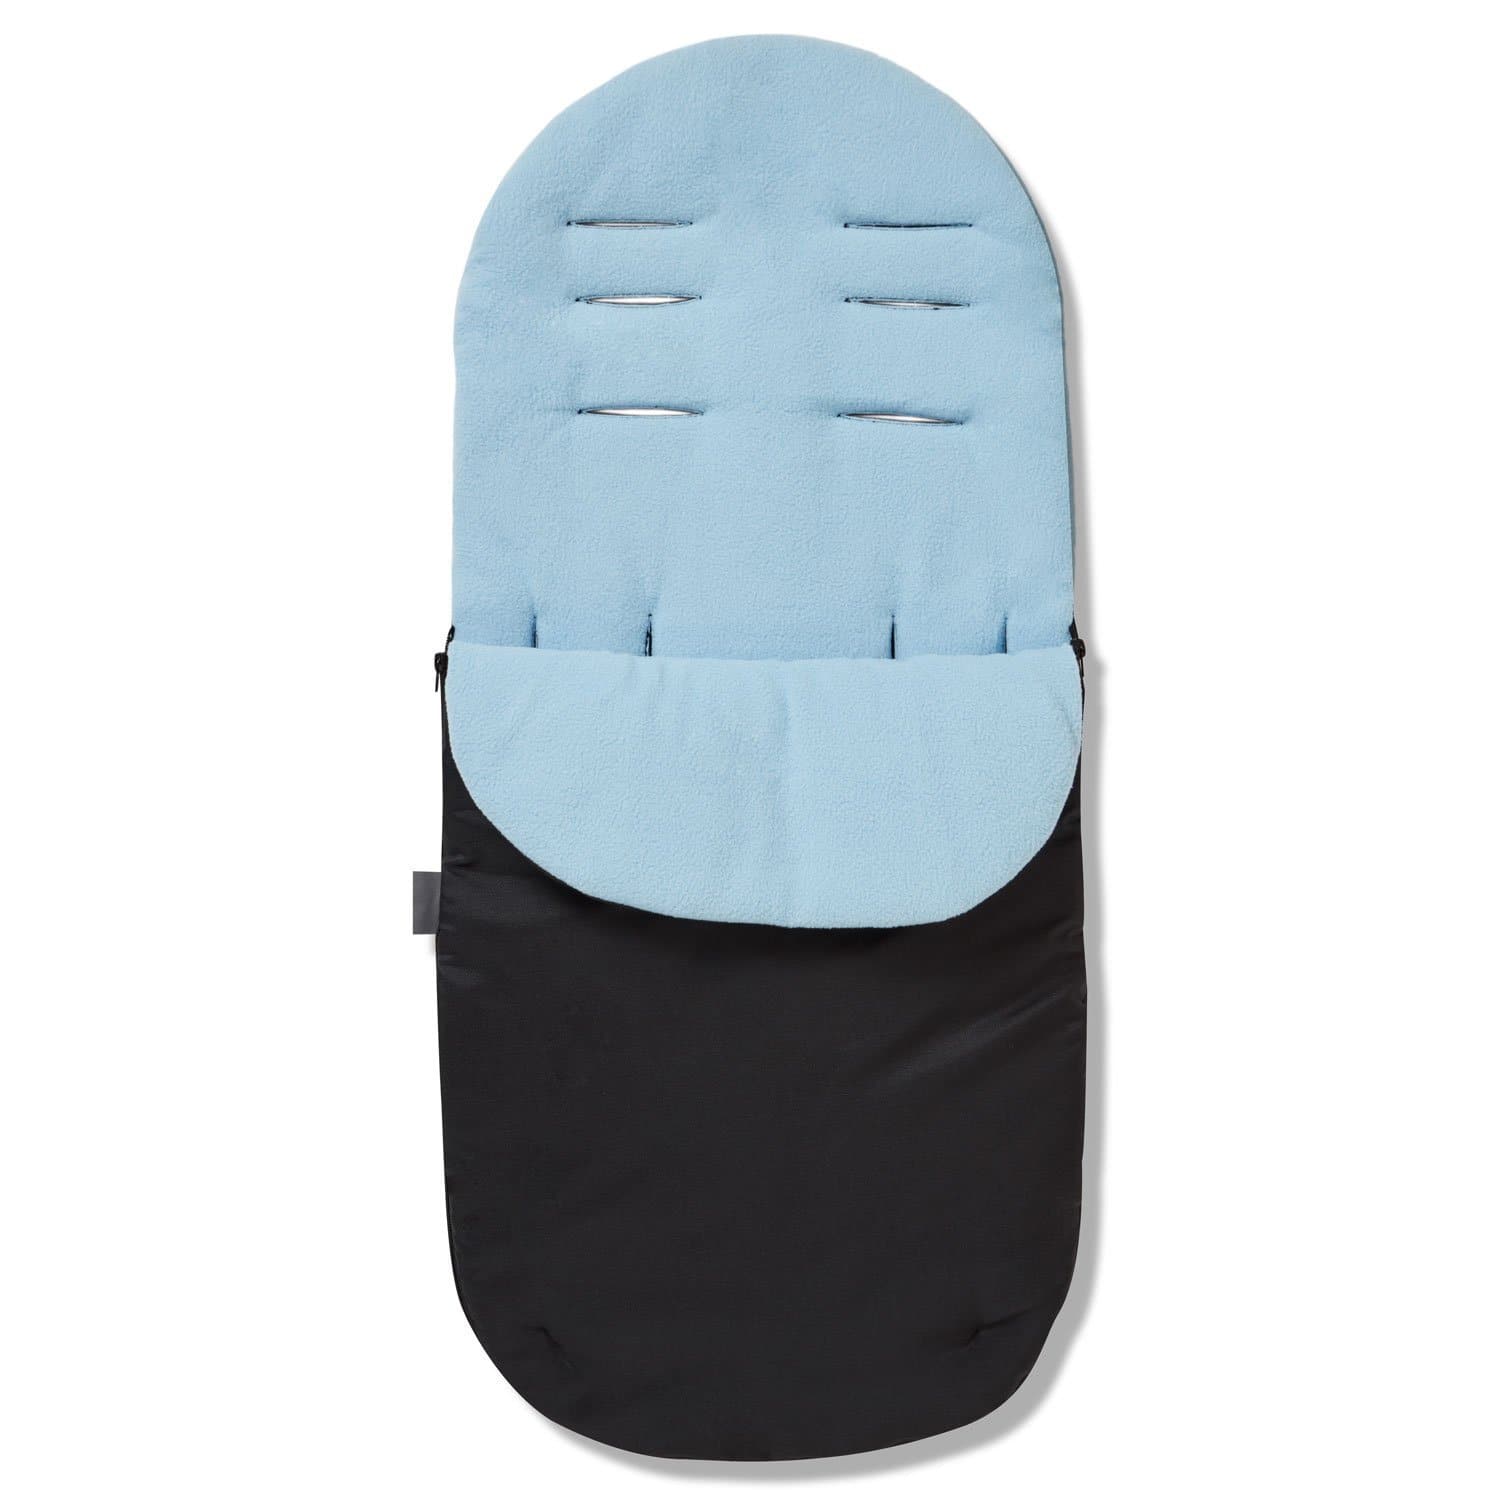 Footmuff / Cosy Toes Compatible with Babywelt - Light Blue / Fits All Models | For Your Little One